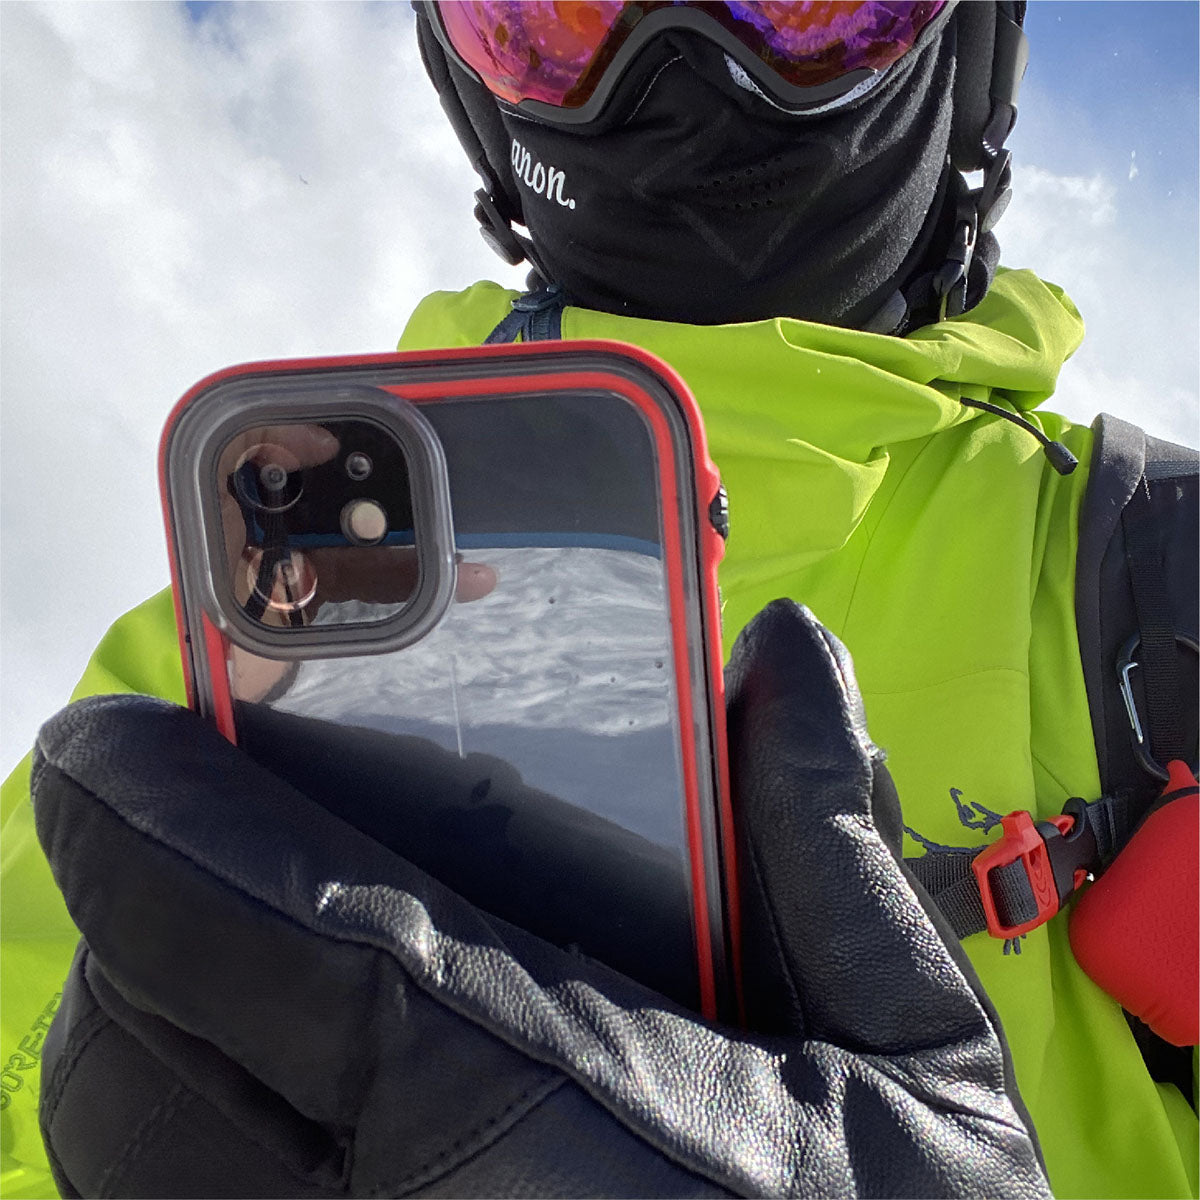 Catalyst iphone 11 series waterproof case in iphone 11 showing the man holding his phone with the case in a flame red colorway. 